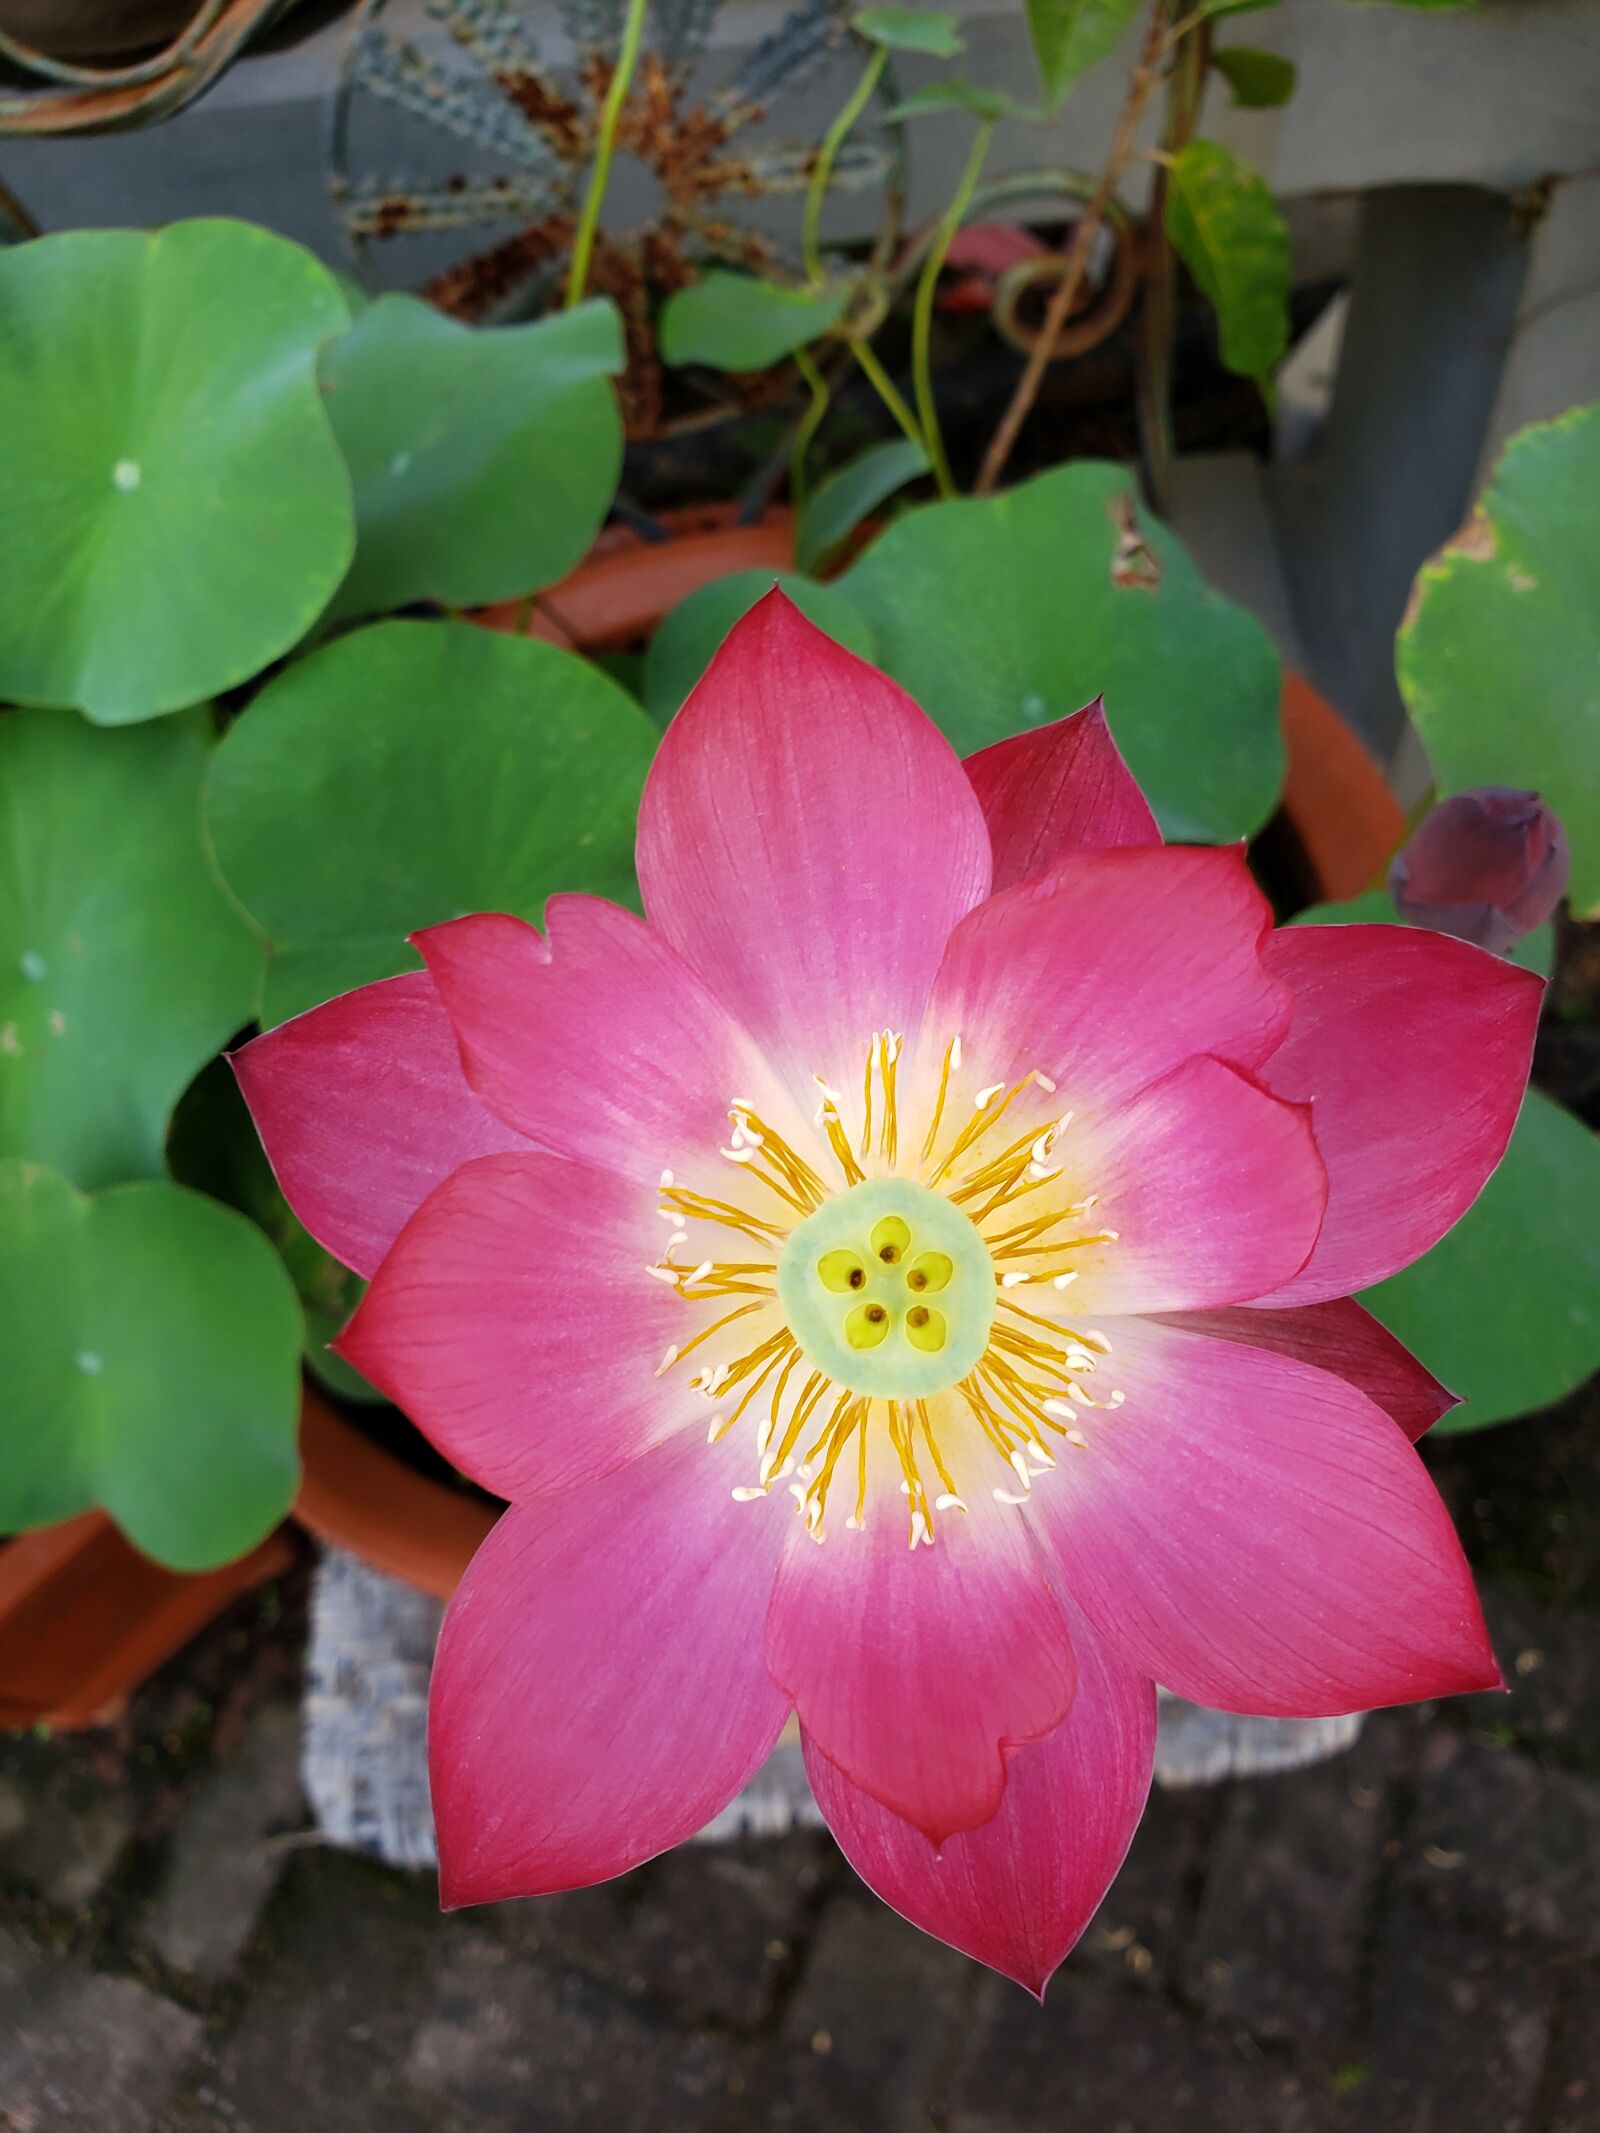 Samsung Galaxy Note9 sample photo. Flower, creation, nature photography